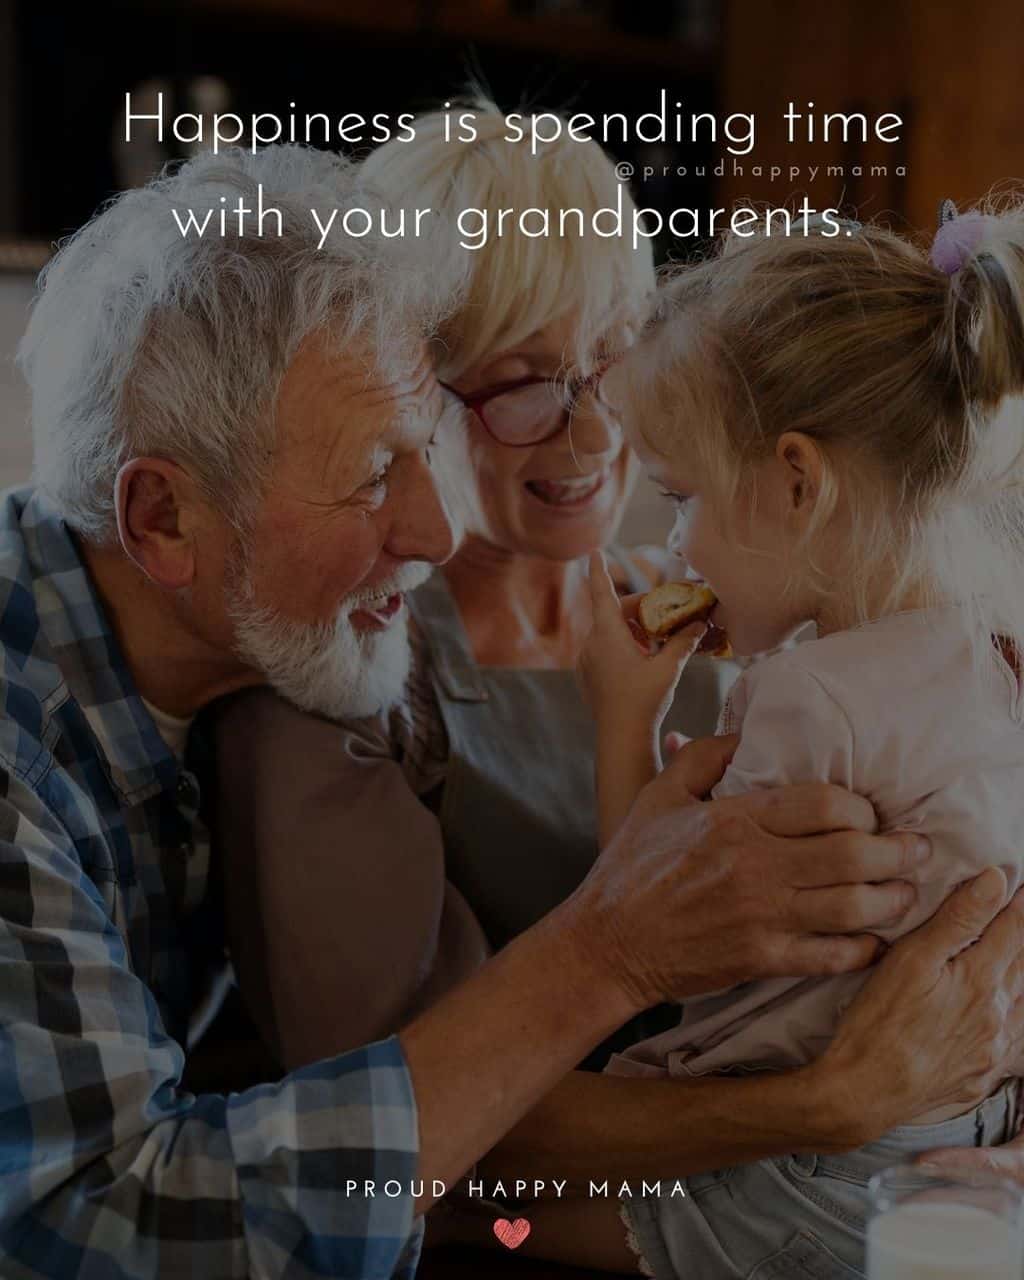 Grandparent Quotes – Happiness is spending time with your grandparents.’